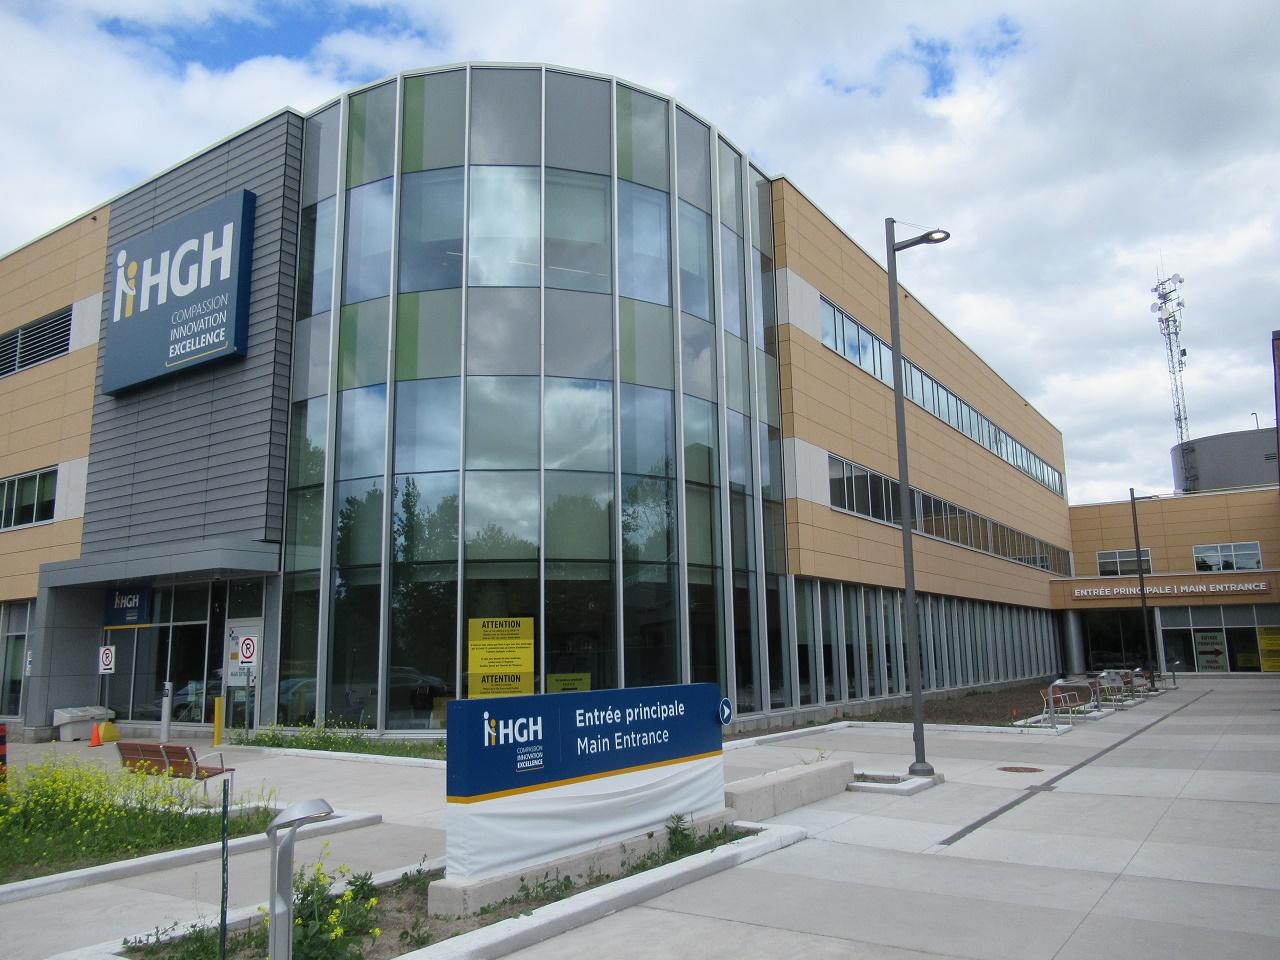 HGH emergency department may temporarily close amid COVID-19 outbreak and staff shortage